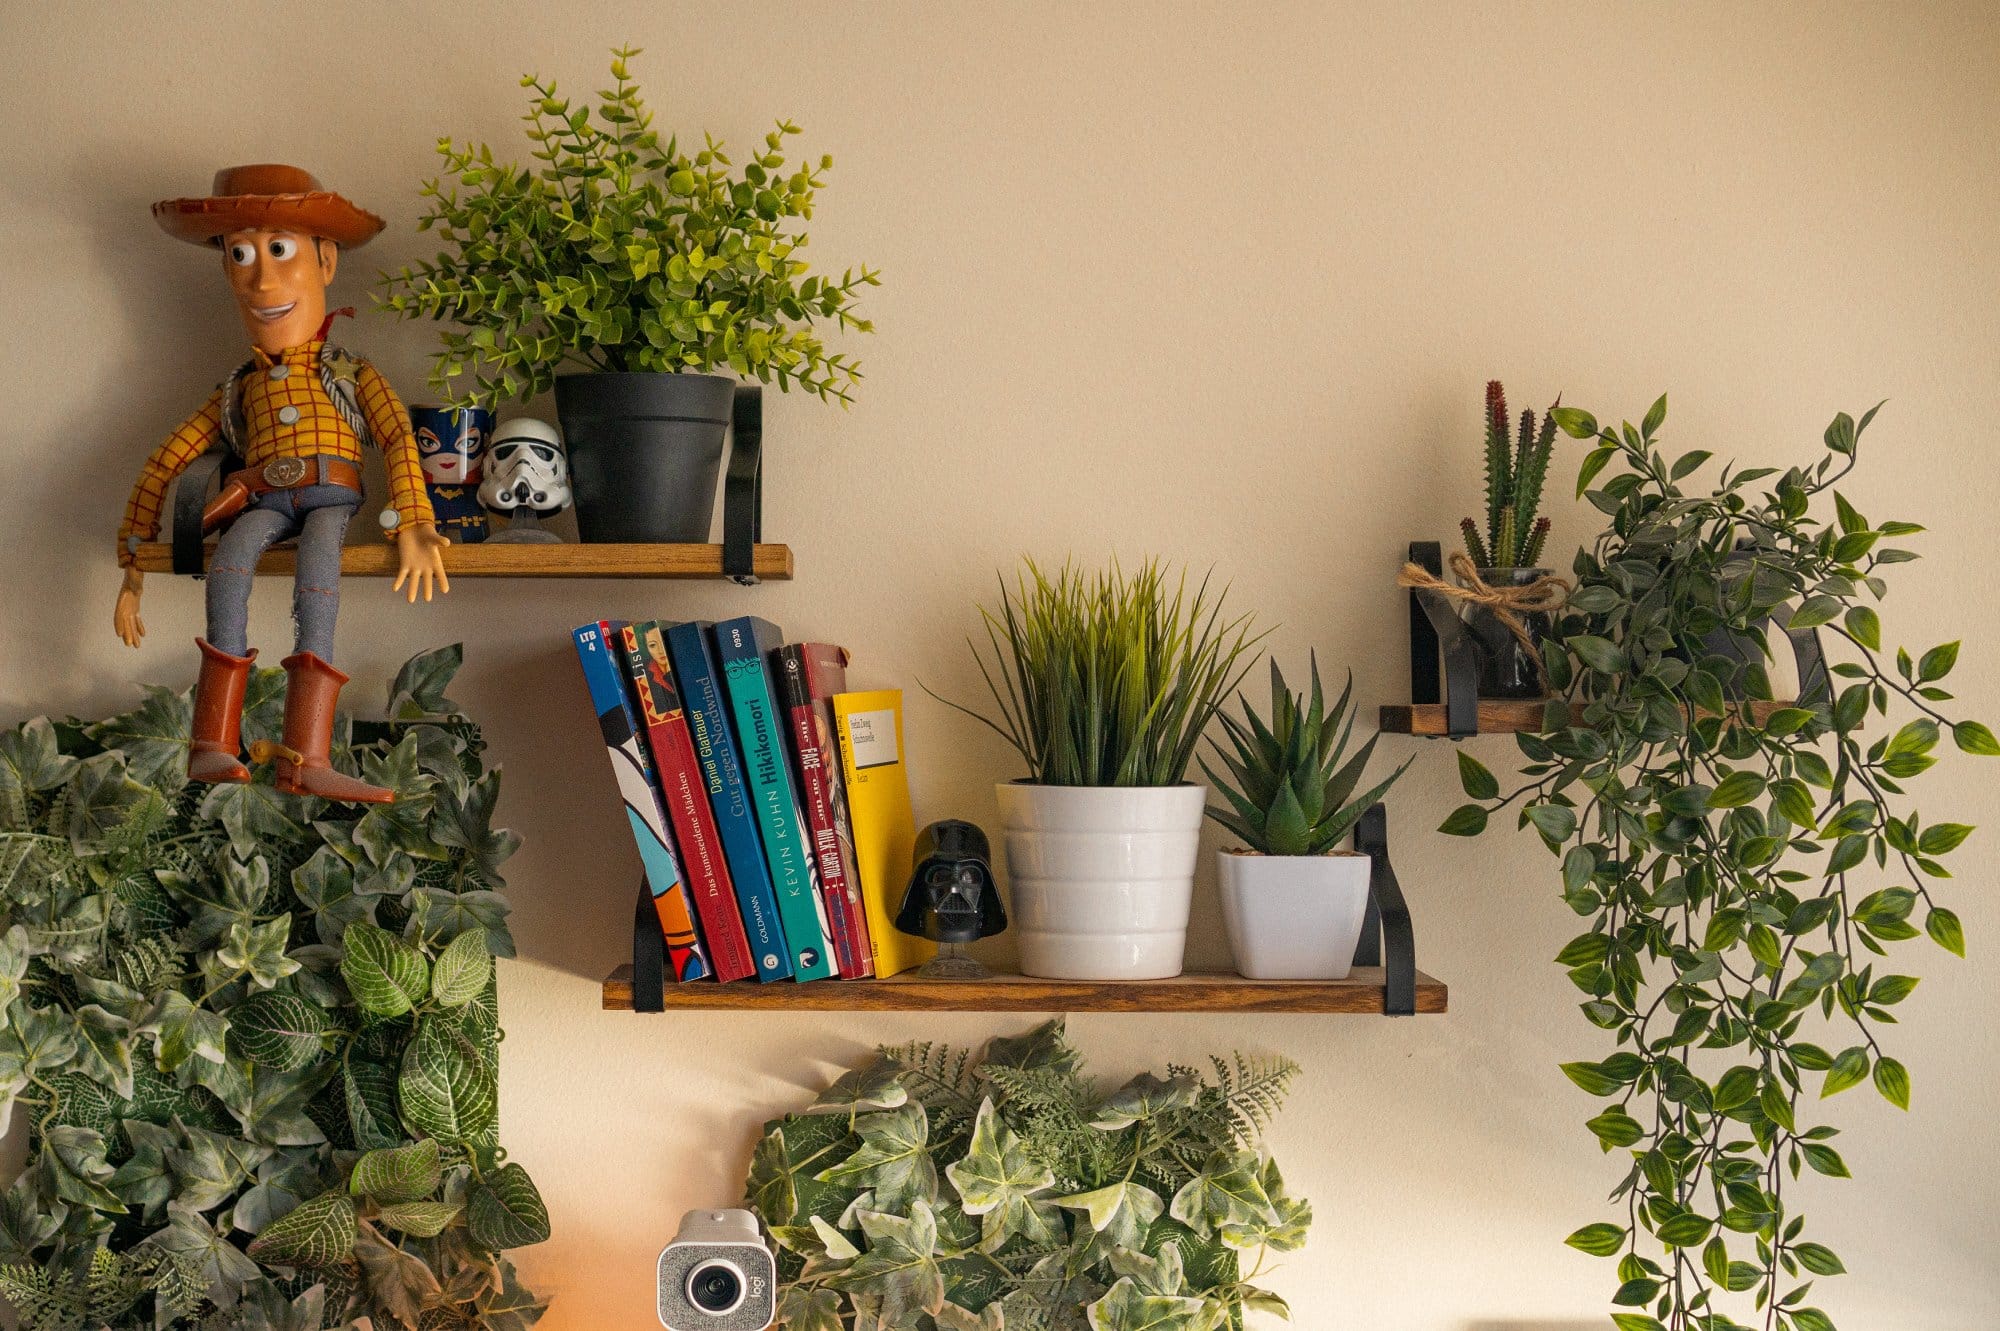 A wall shelf displaying a variety of items including a figurine, books, potted plants, and a camera, creating a lively and decorative corner